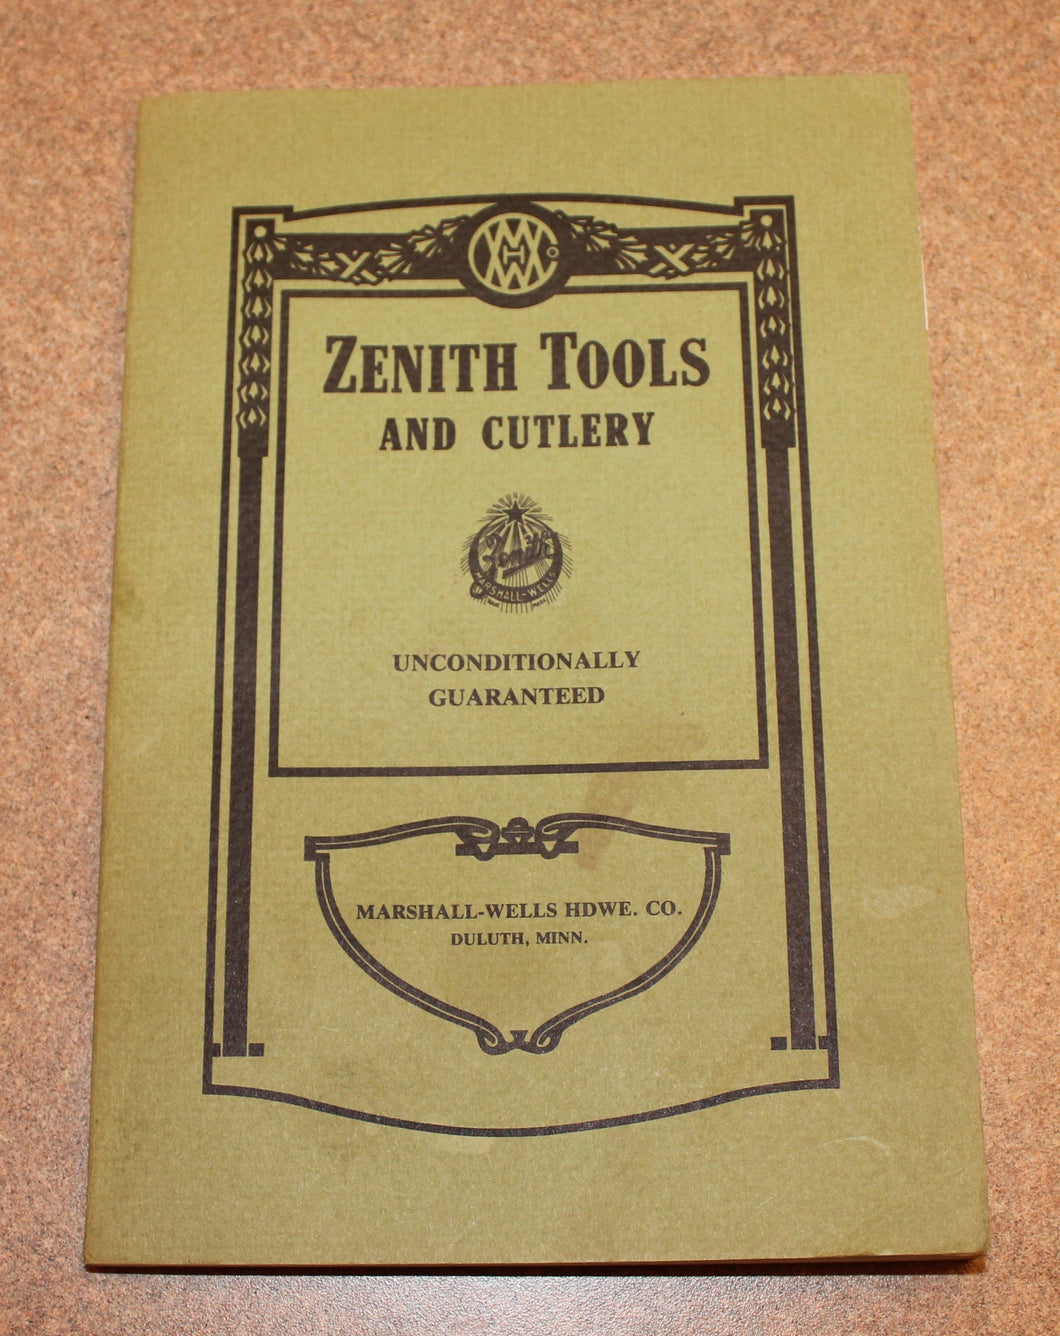 Zenith Tools and Cutlery Catalog